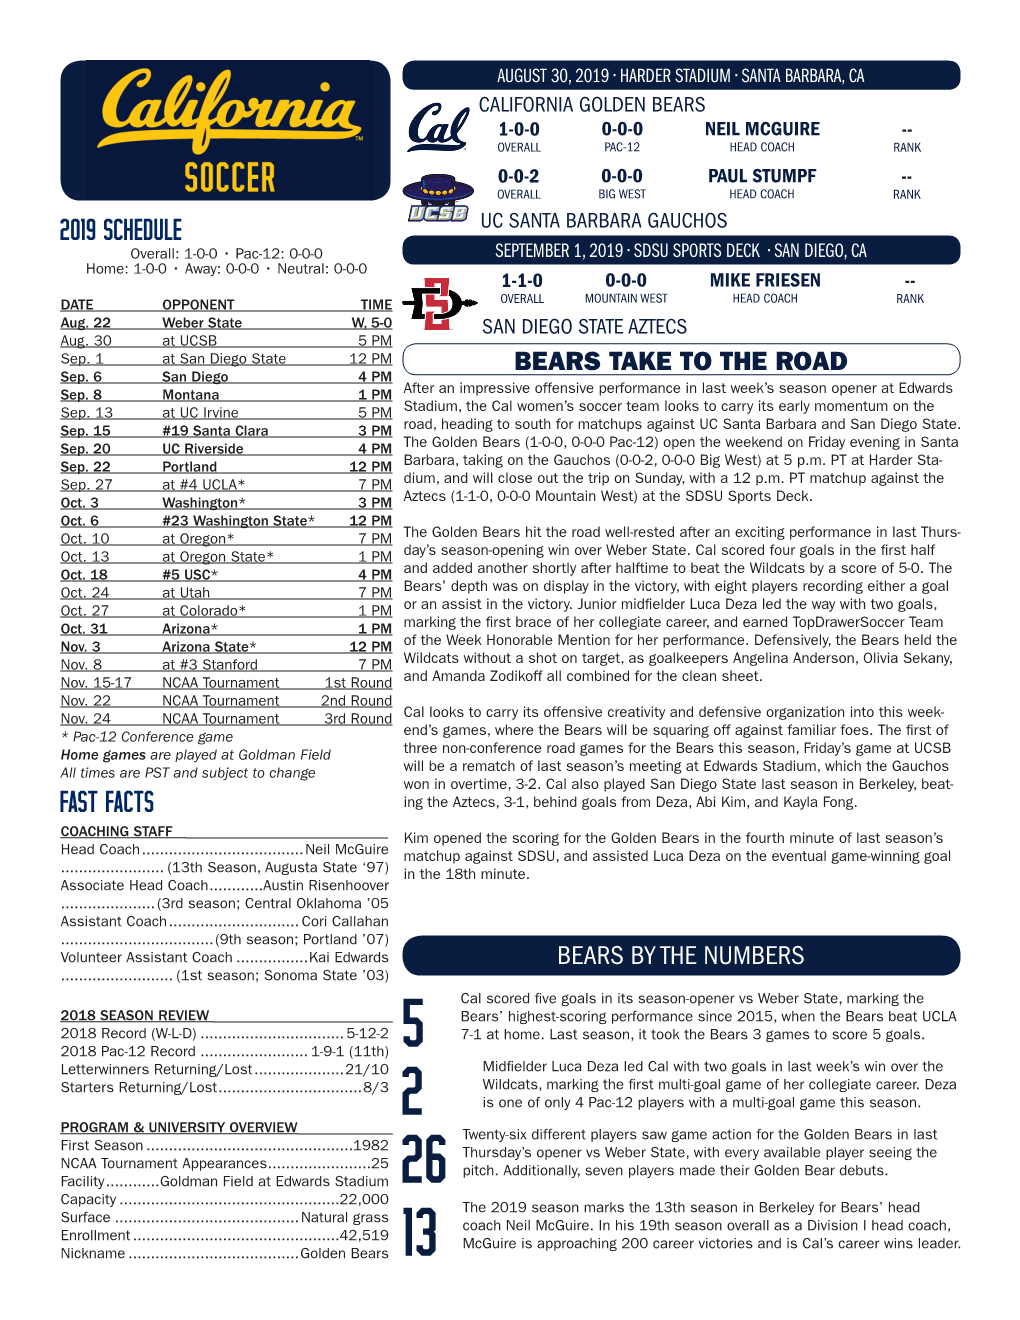 2019 Schedule Fast Facts Bears by the Numbers Bears